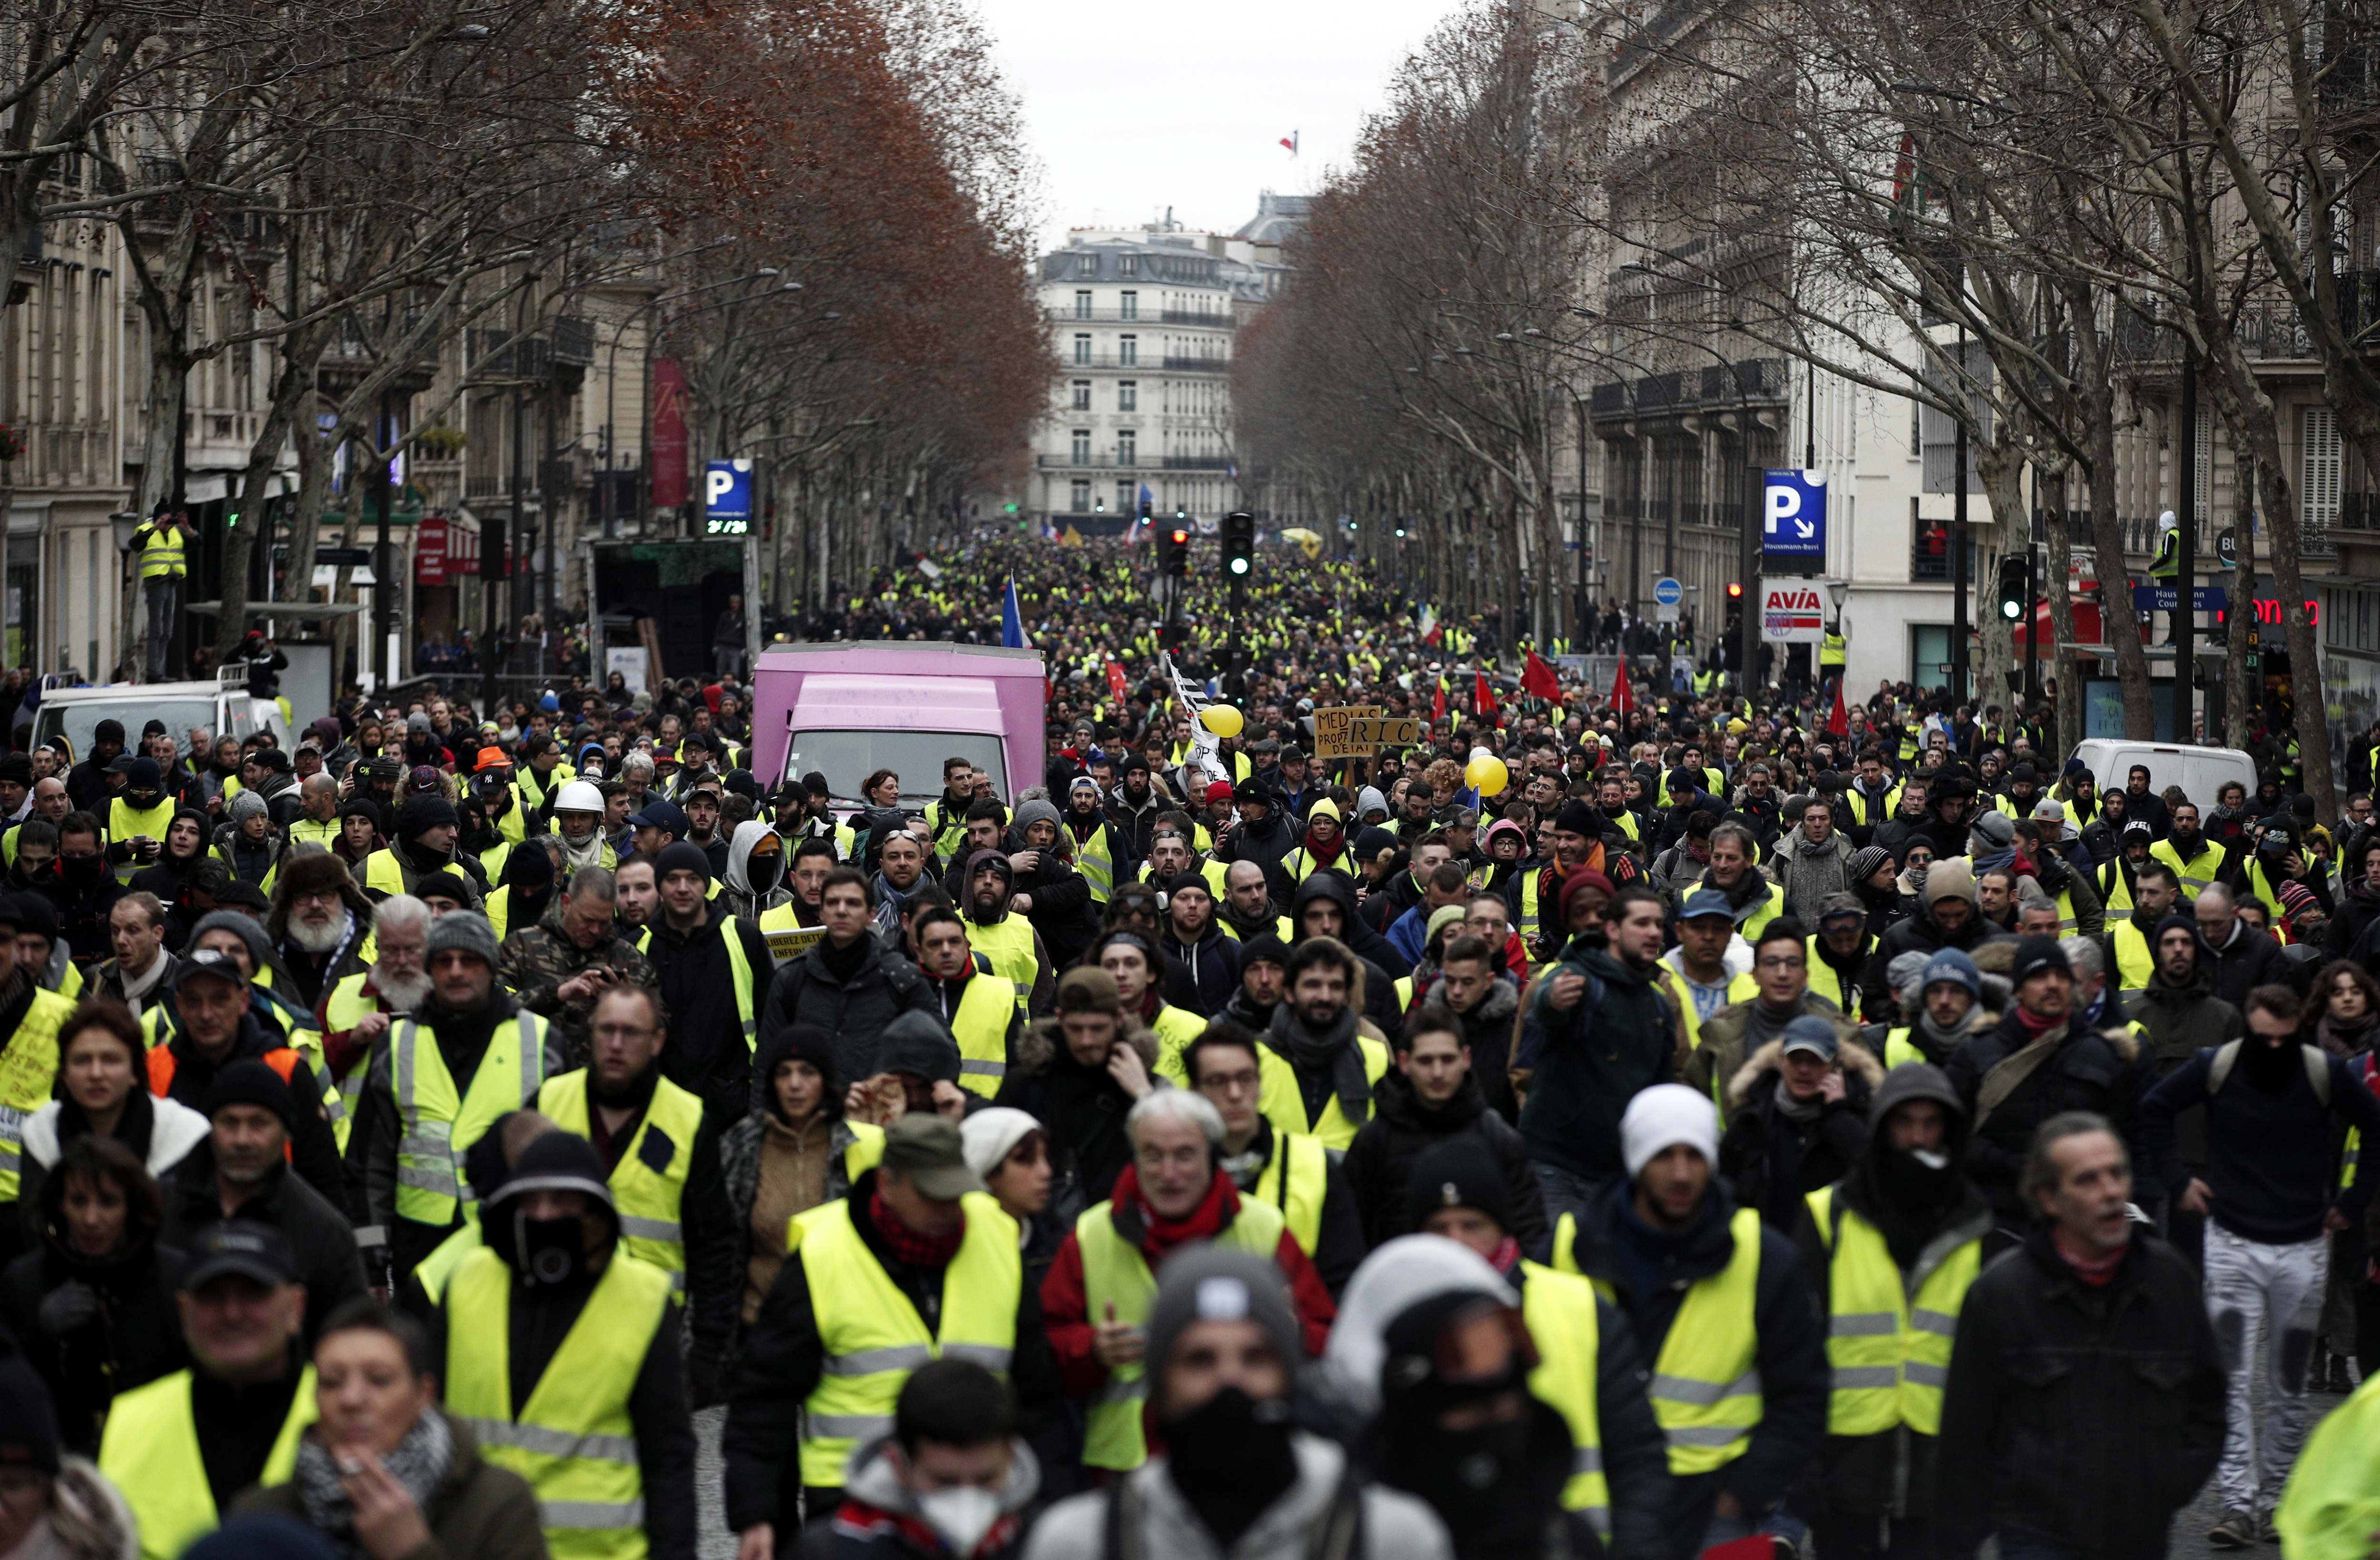 epa07277484 Protesters from the 'Gilets Jaunes' (Yellow Vests) movement take part in the 'Act IX' demonstration (the 9th consecutive national protest on a Saturday) in Paris, France, 12 January 2019. The so-called 'gilets jaunes' (yellow vests) is a grassroots protest movement with supporters from a wide span of the political spectrum, that originally started with protest across the nation in late 2018 against high fuel prices. The movement in the meantime also protests the French government's tax reforms, the increasing costs of living and some even call for the resignation of French President Emmanuel Macron.  EPA/YOAN VALAT